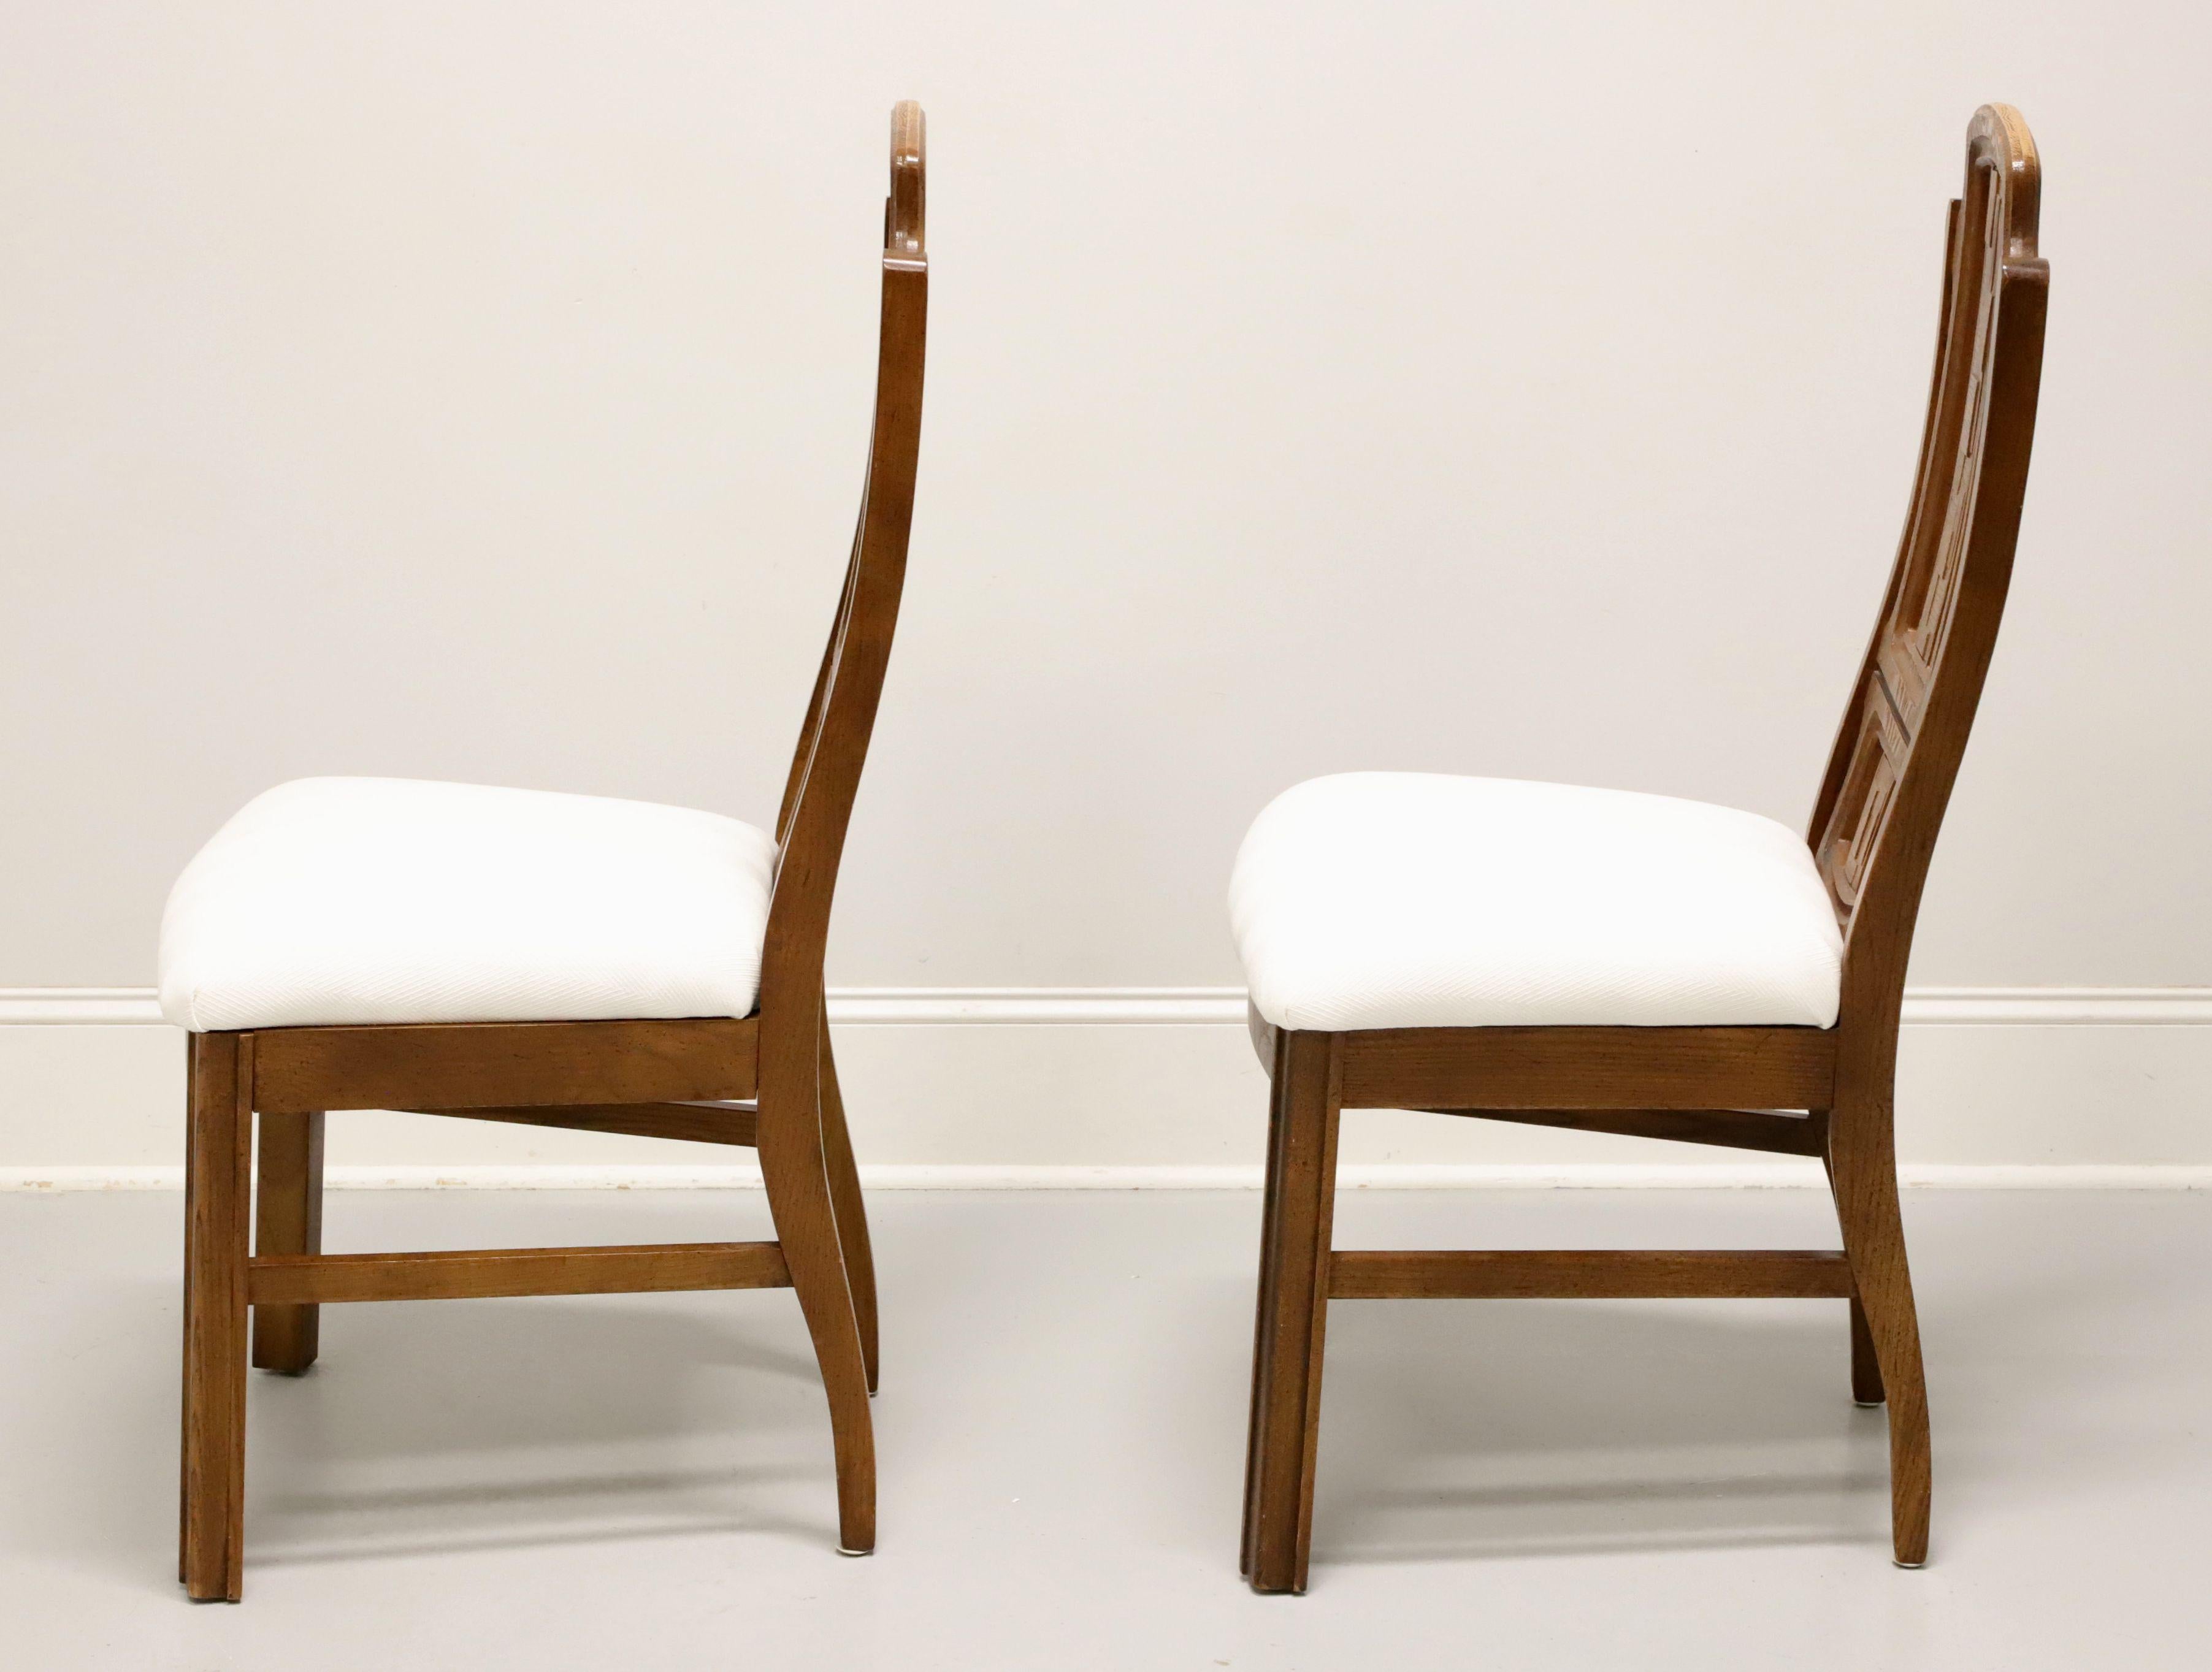 BROYHILL PREMIER Mid 20th Century Oak Brutalist Style Dining Side Chairs -Pair A In Good Condition For Sale In Charlotte, NC